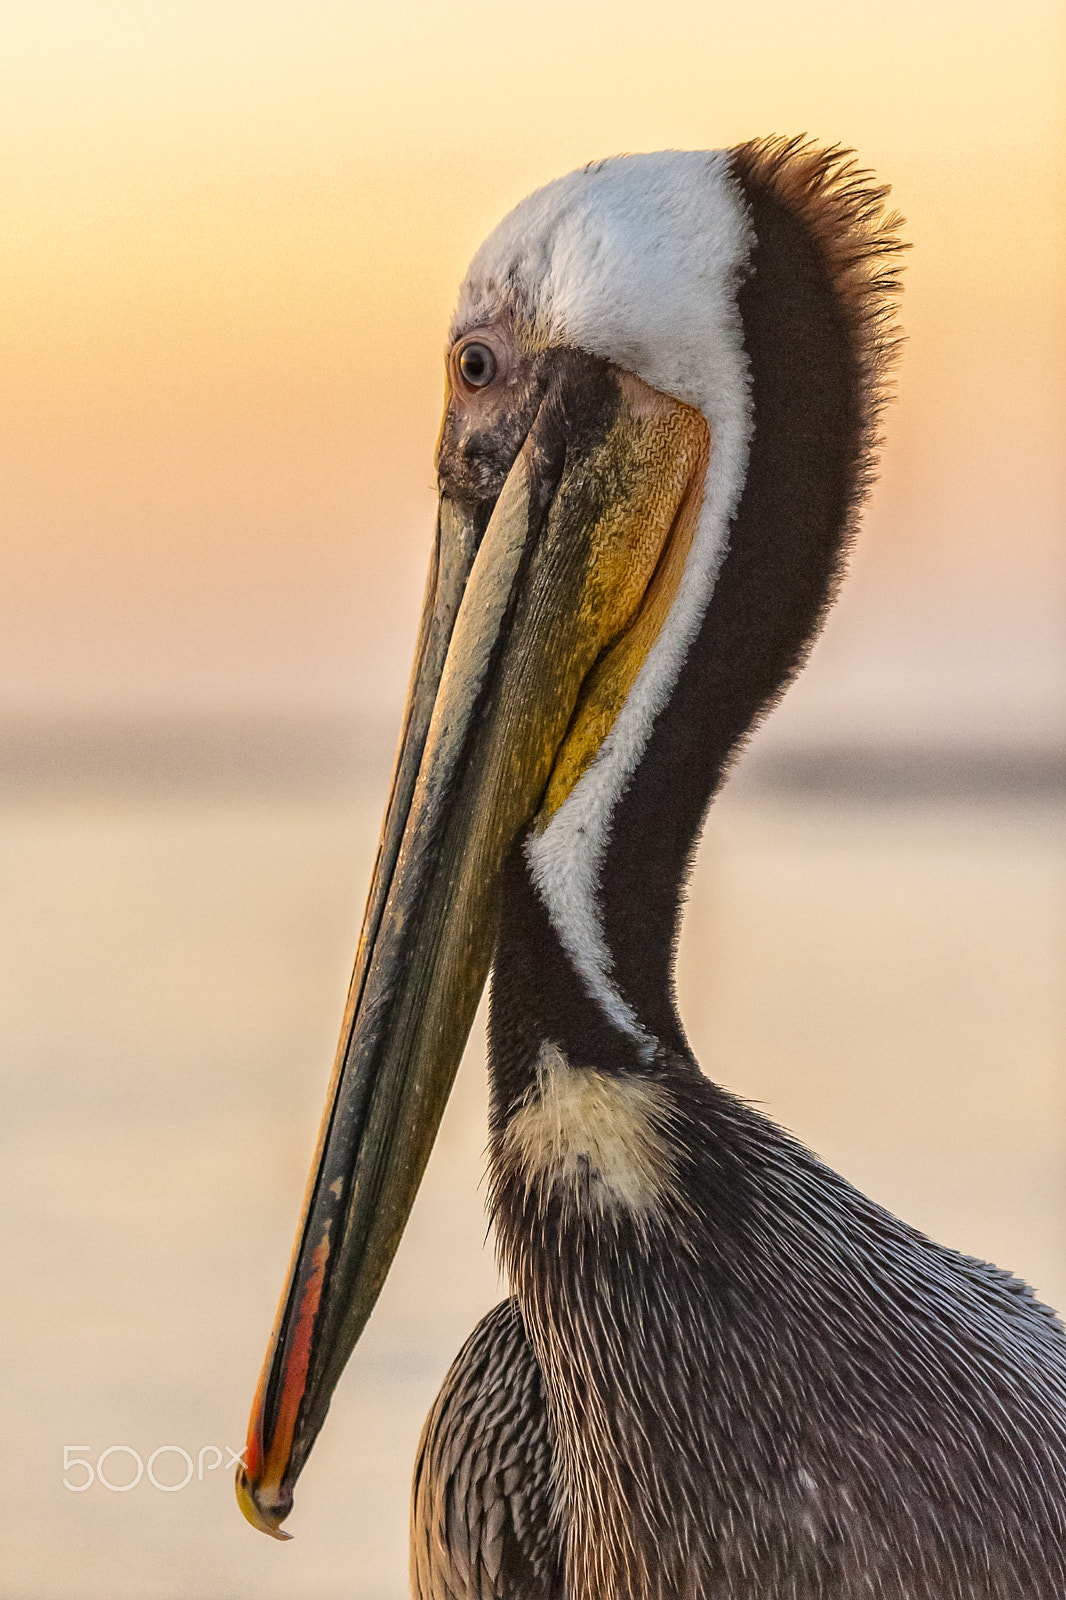 Nikon D700 sample photo. Pelican on the pier at sunset in oceanside - march 16, 2017 photography